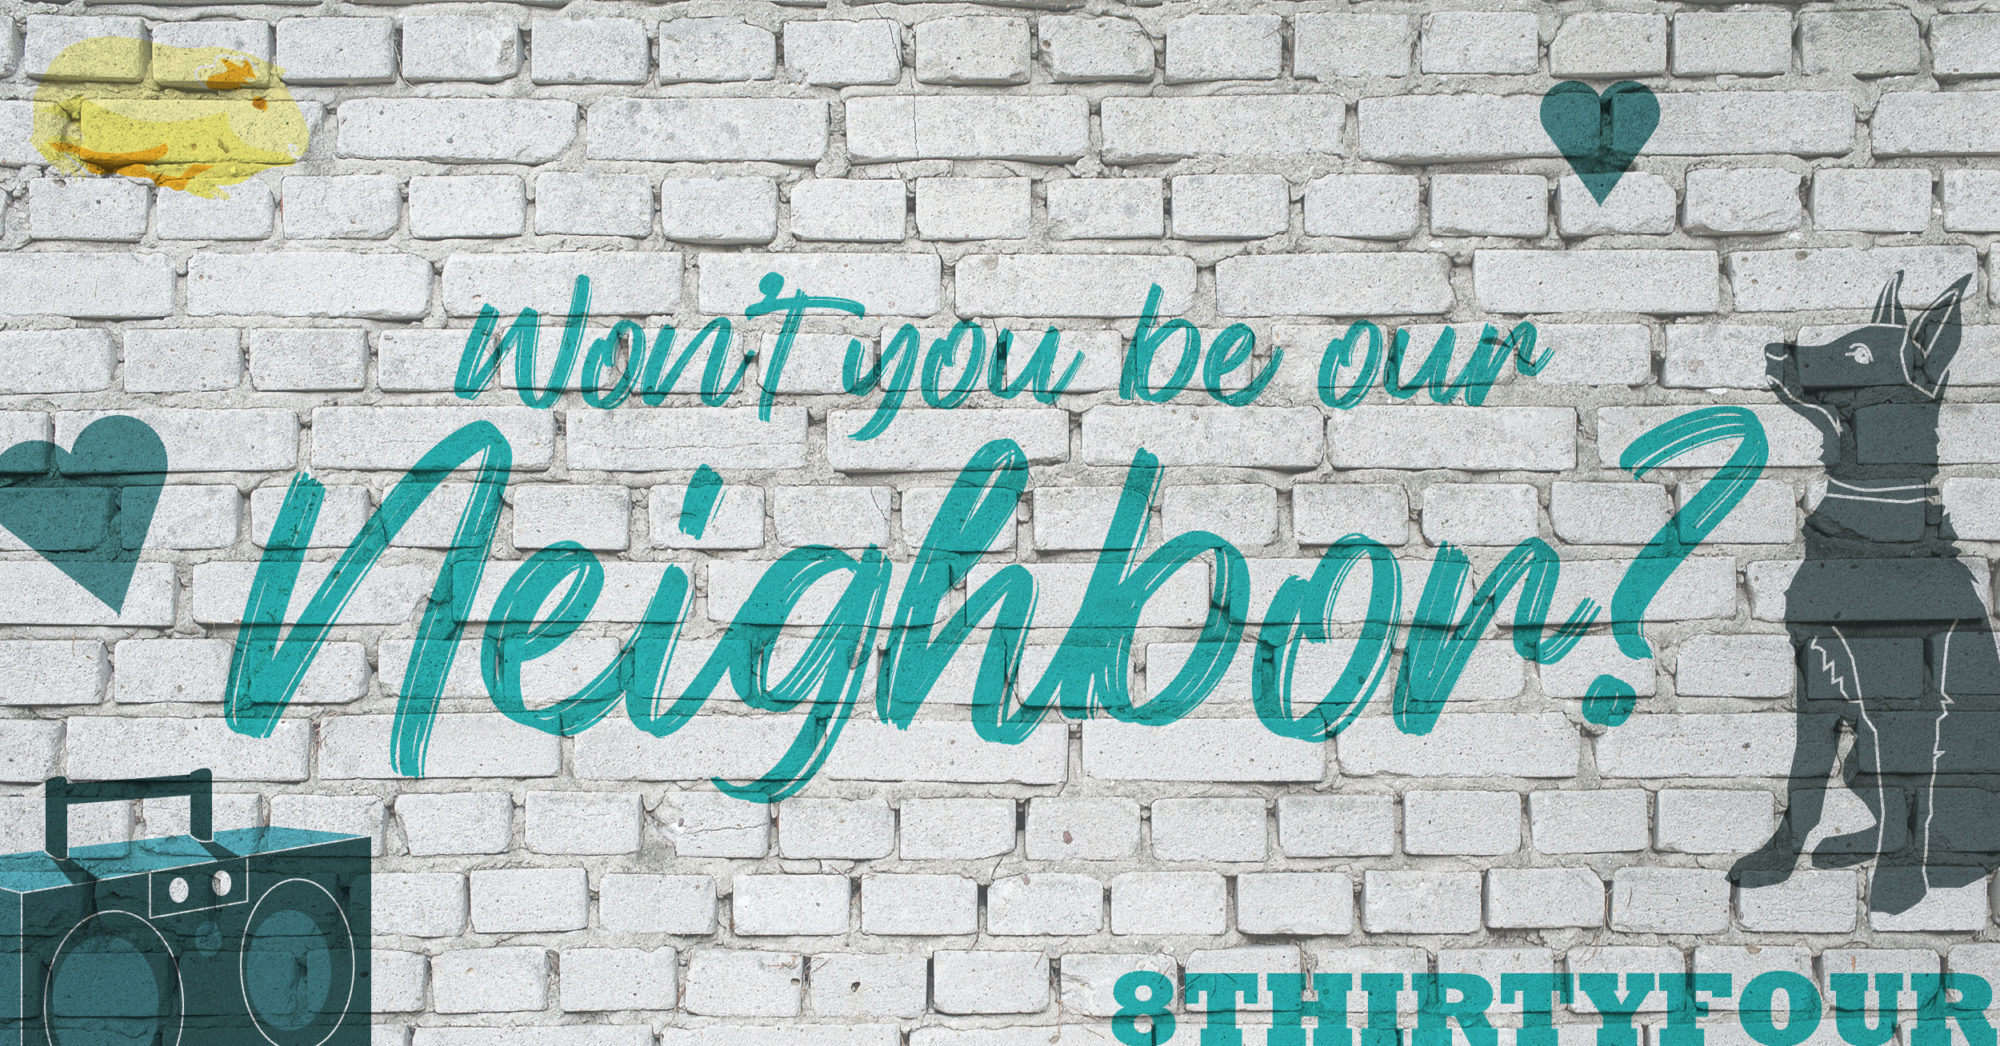 A white brick wall with teal painted dog, golden guinea pic, and hearts, with the text, "Won't You Be Our Neighbor?"